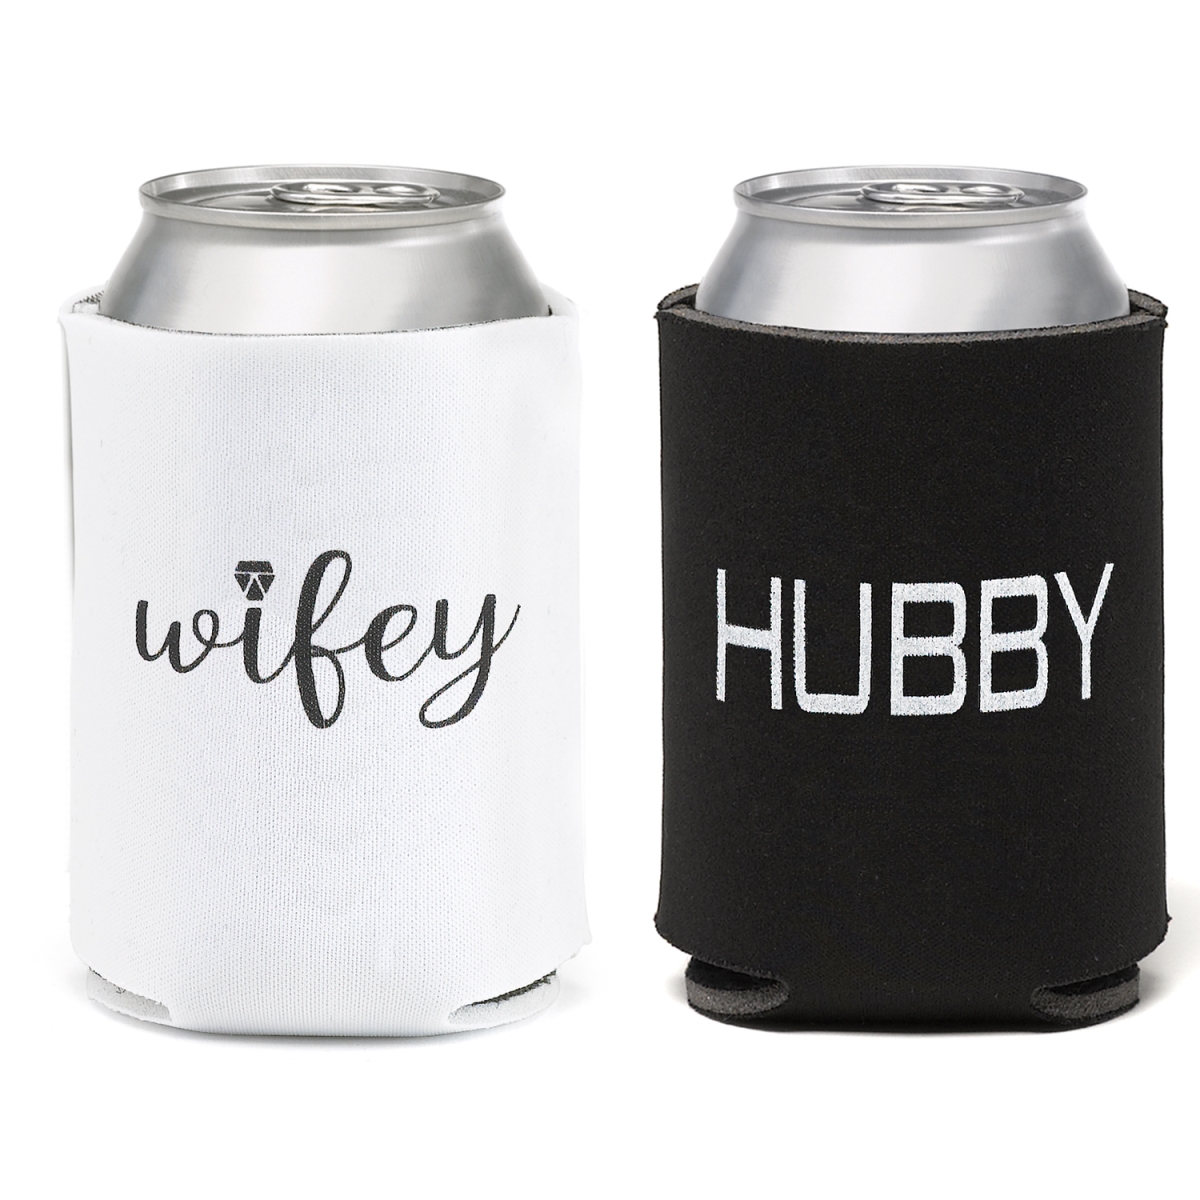 Picture of Hortense B. Hewitt 21575 Wifey Hubby Can Coolie Set - Pack of 2